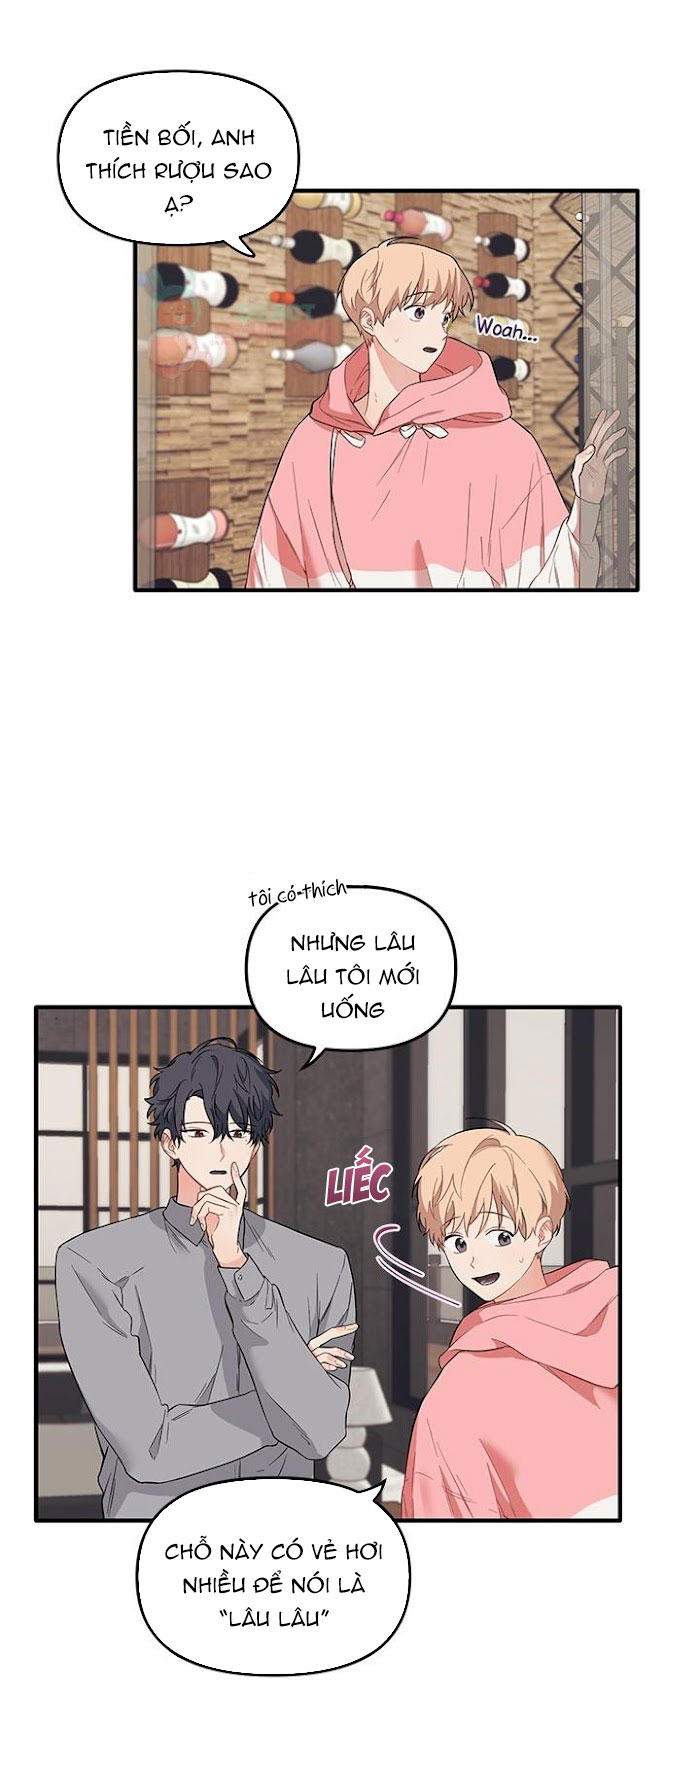 blood-and-love-chap-20-1